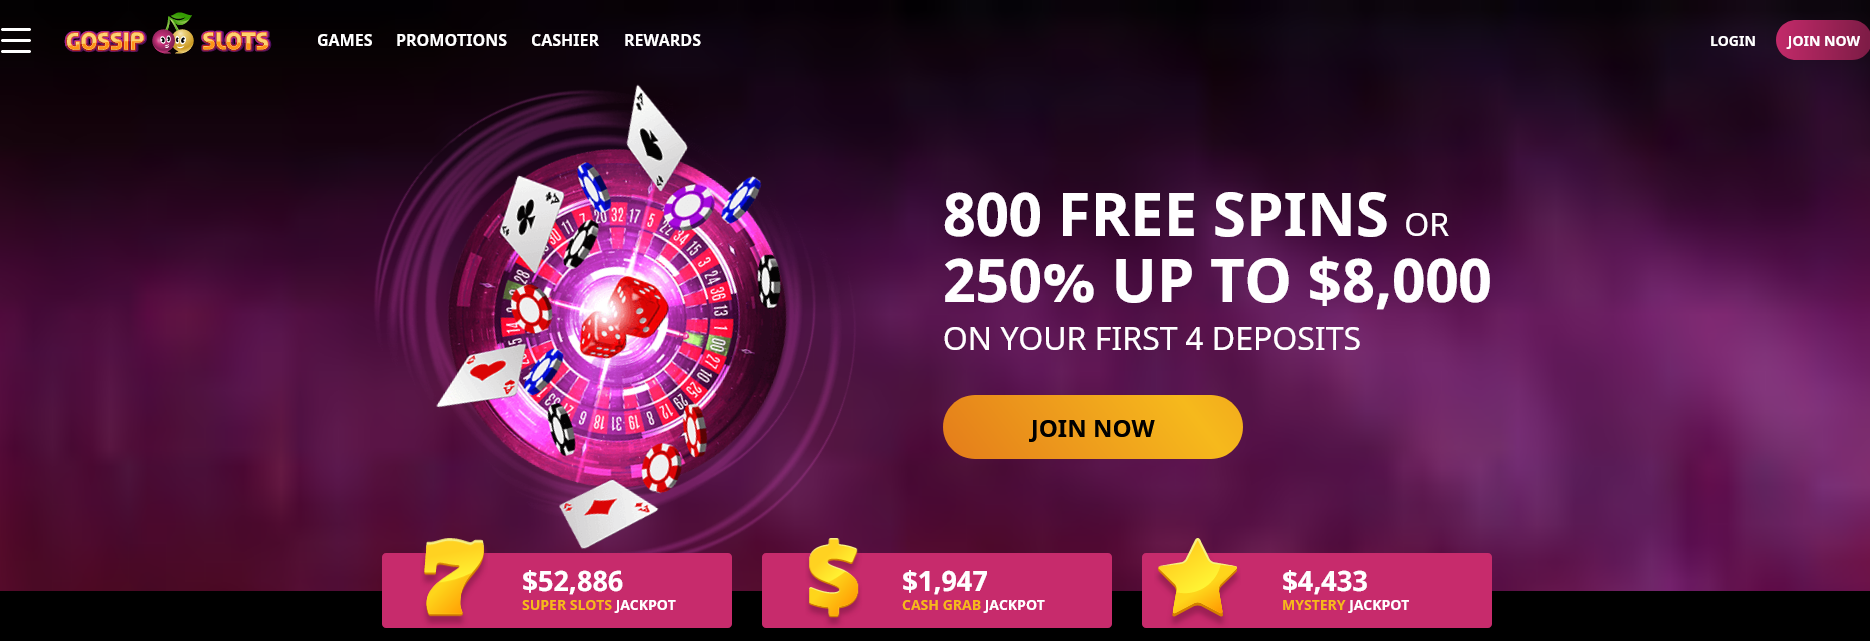 800 free spins or 250% up to $8,000 on
                                                        your first 4
                                                        deposits